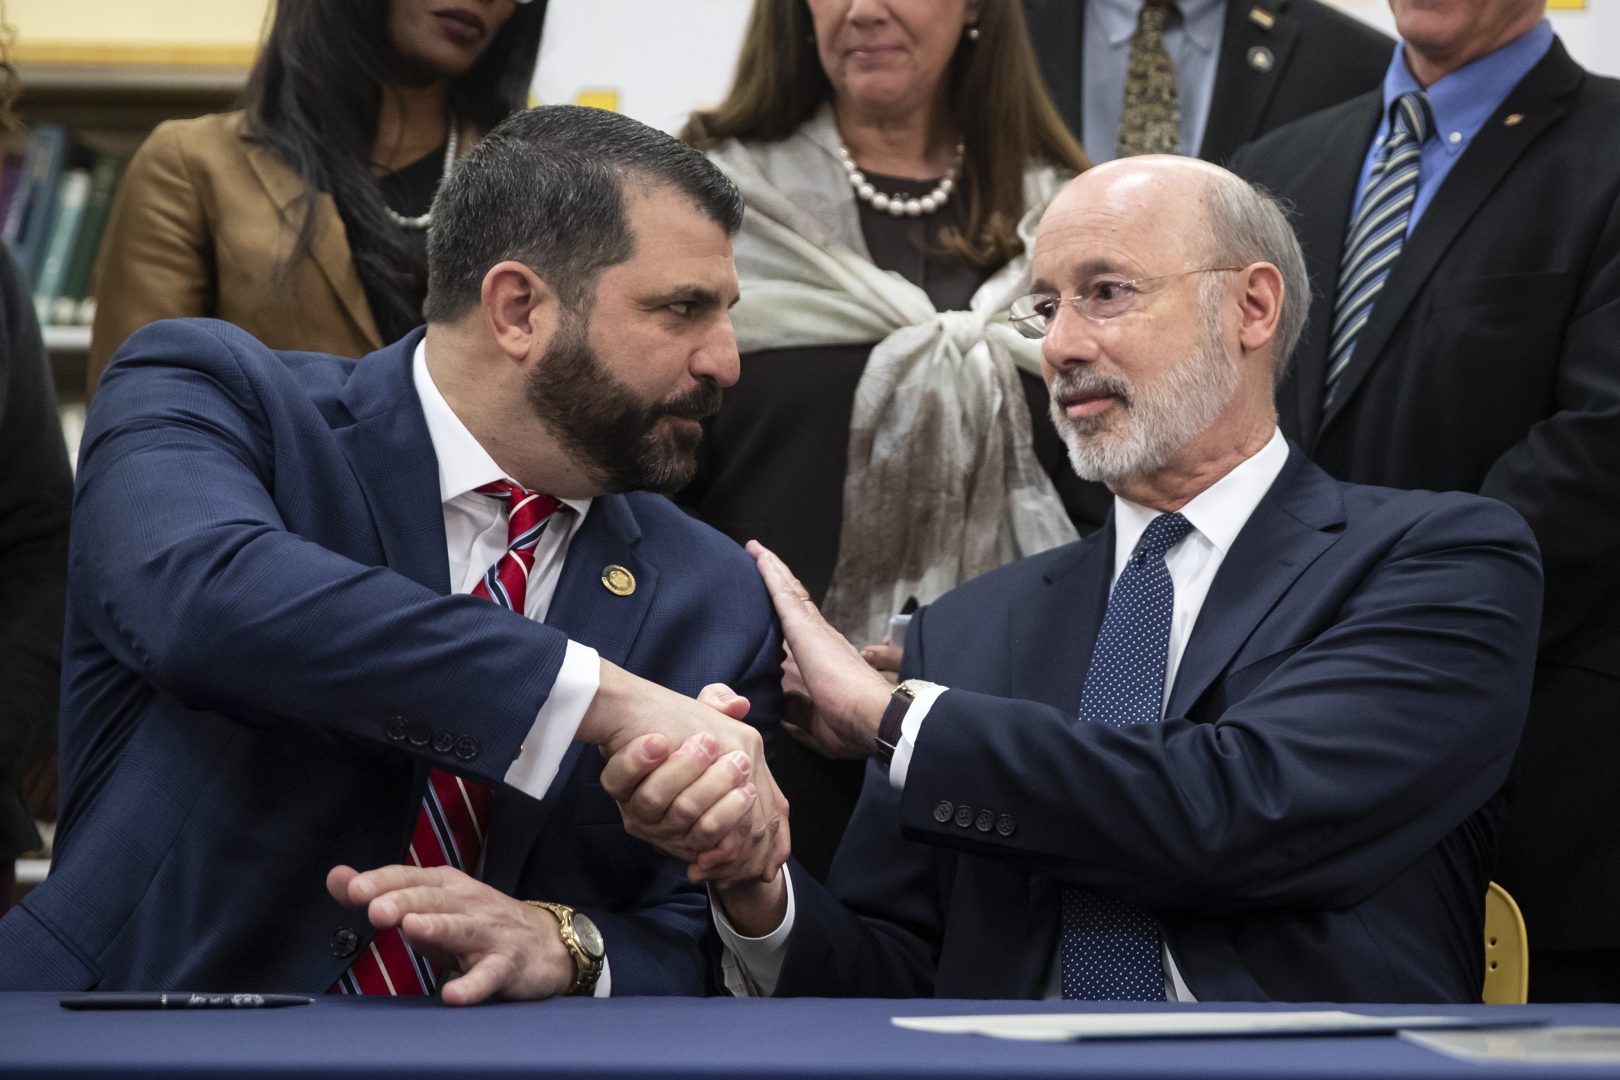 FILE PHOTO: Pennsylvania Gov. Tom Wolf, right, shakes hands with Rep. Mark Rozzi, D-Berks, after signing legislation into law at Muhlenberg High School in Reading, Pa., Tuesday, Nov. 26, 2019. Wolf approved legislation Tuesday to give future victims of child sexual abuse more time to file lawsuits and to end time limits for police to file criminal charges.